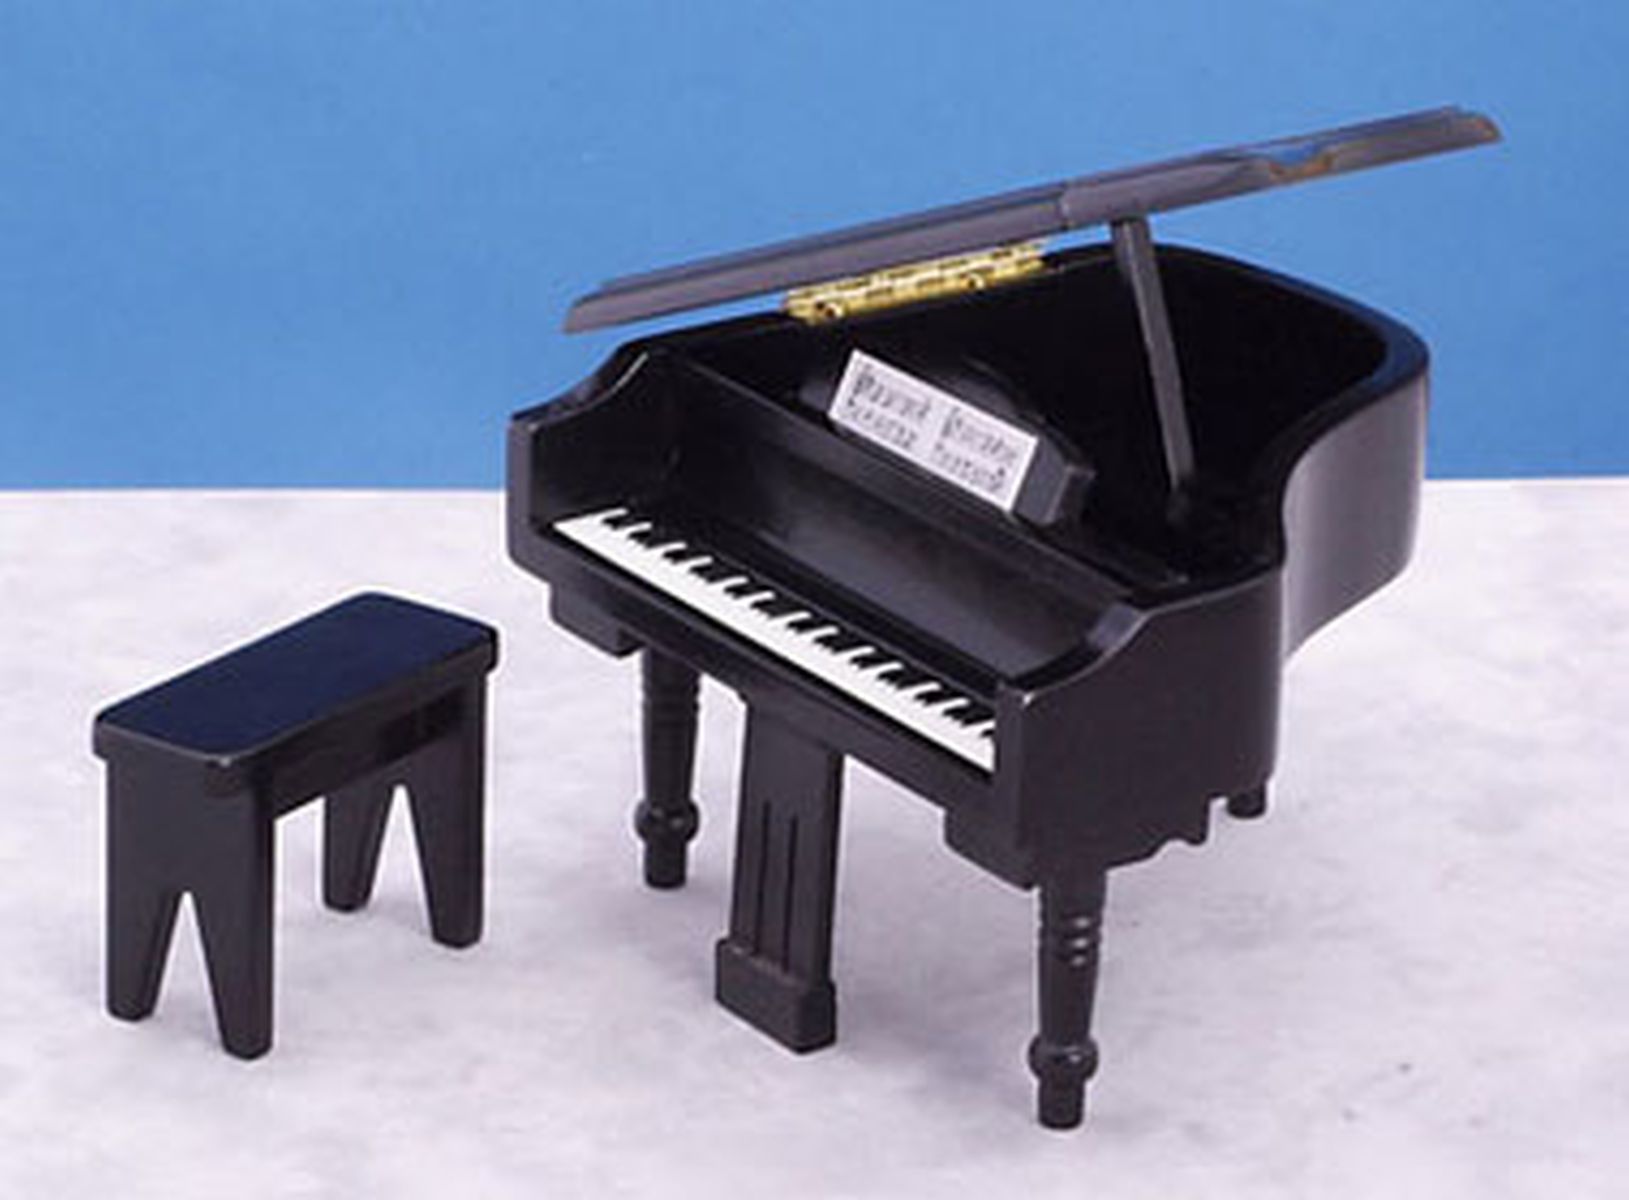 Black Piano & Bench by Town Square Miniatures